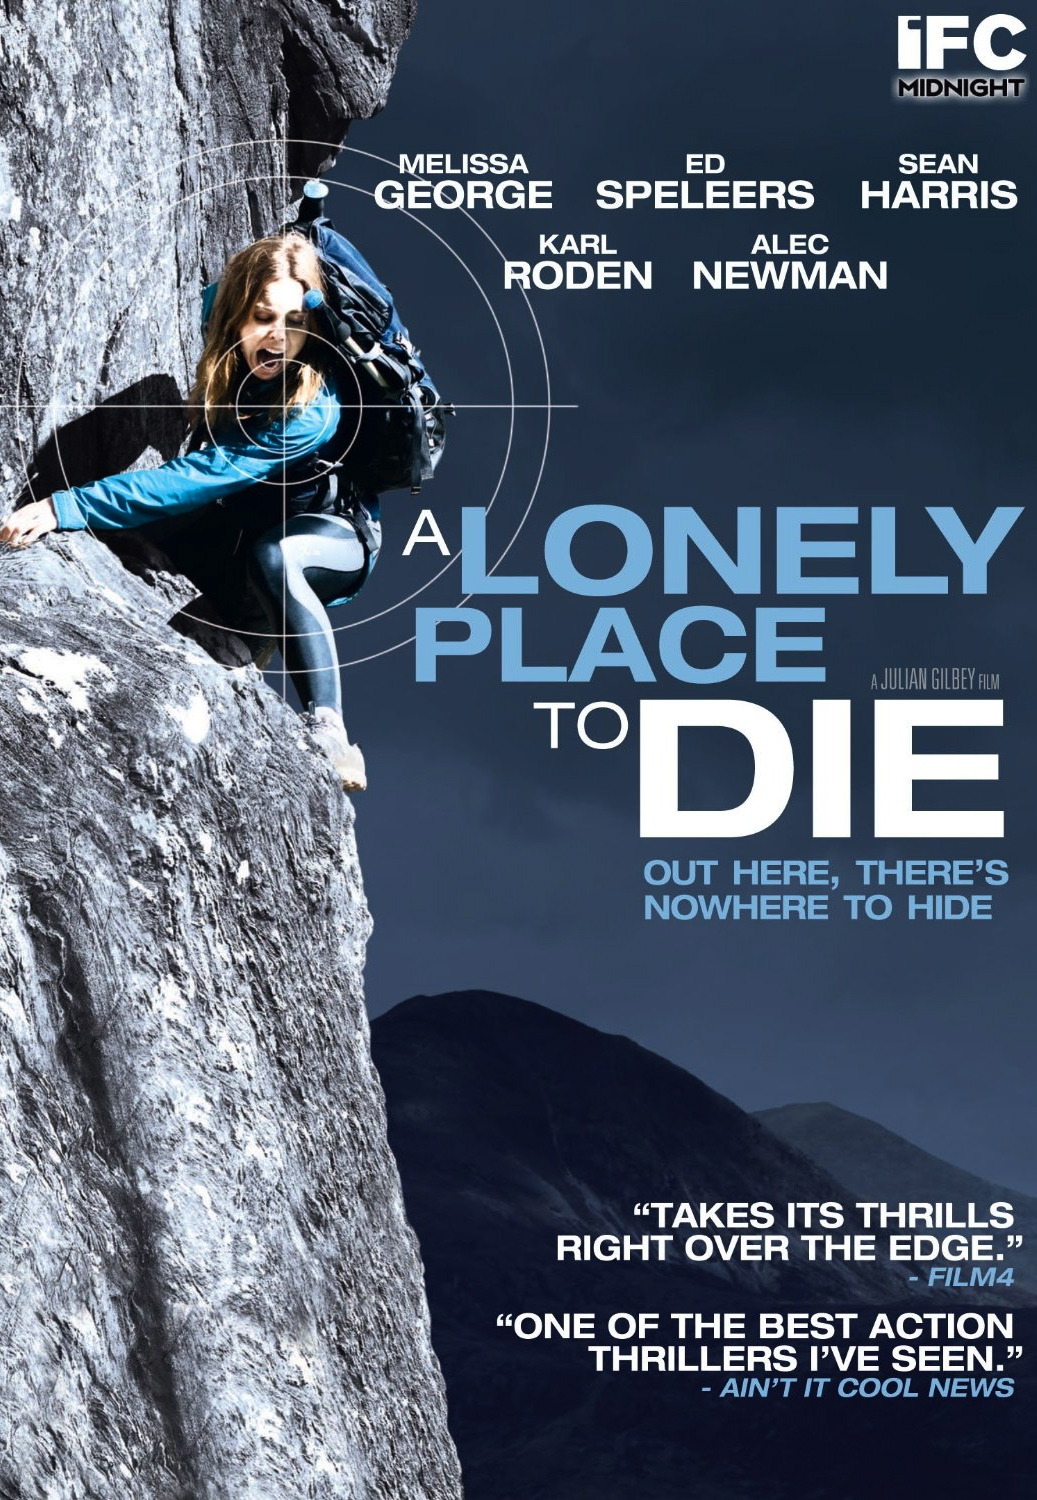 a lonely place to die movie review